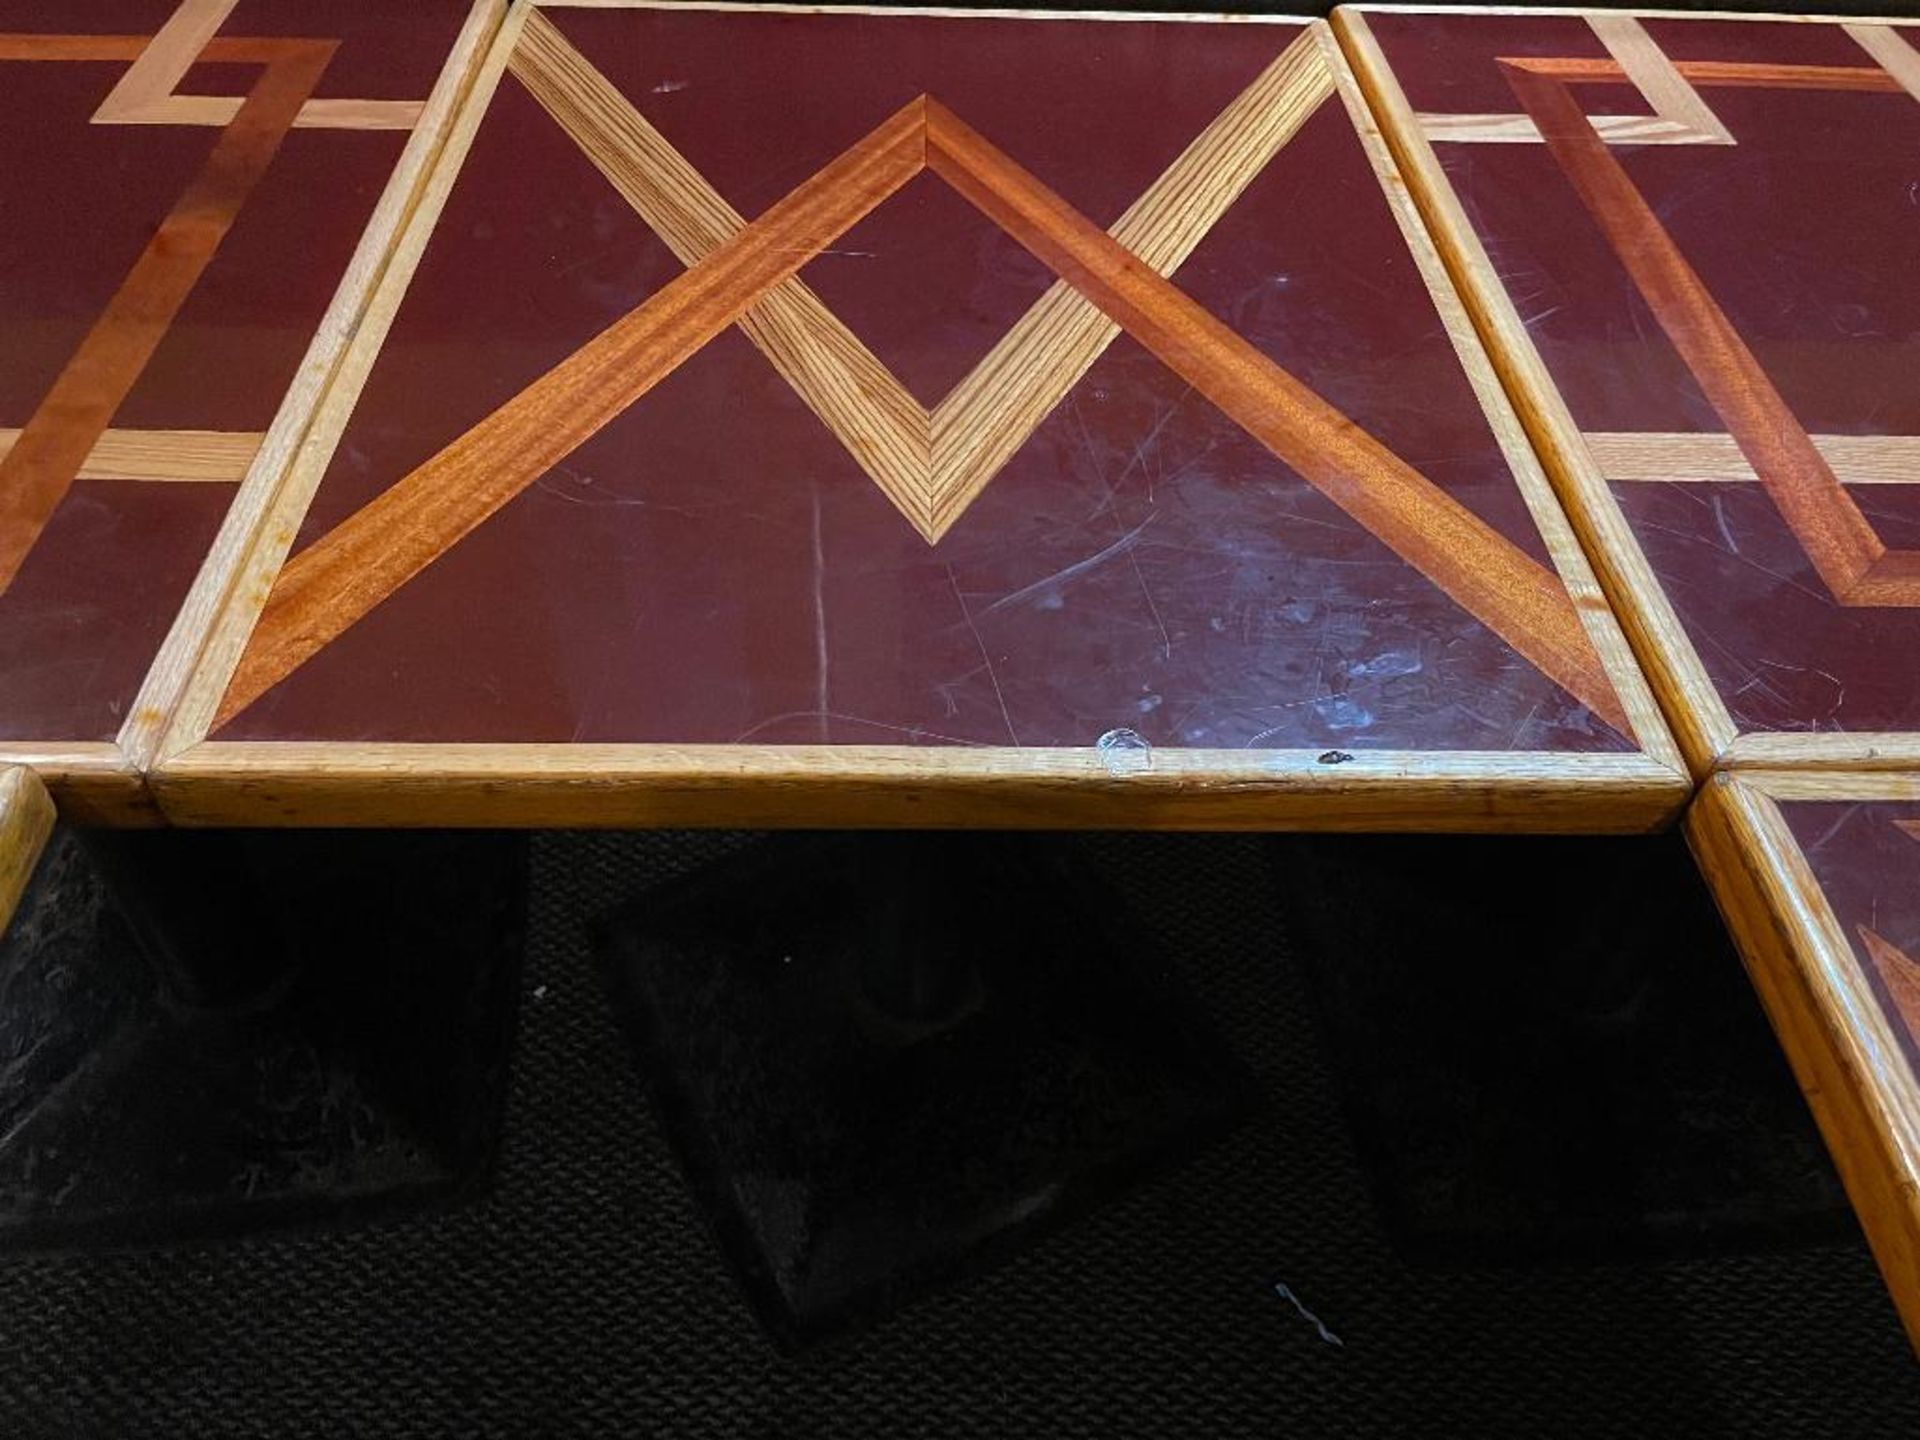 DESCRIPTION: 24" X 30" WOODEN TABLE TOPS W/ BASES SIZE 24" X 30" LOCATION: SEATING QTY: 1